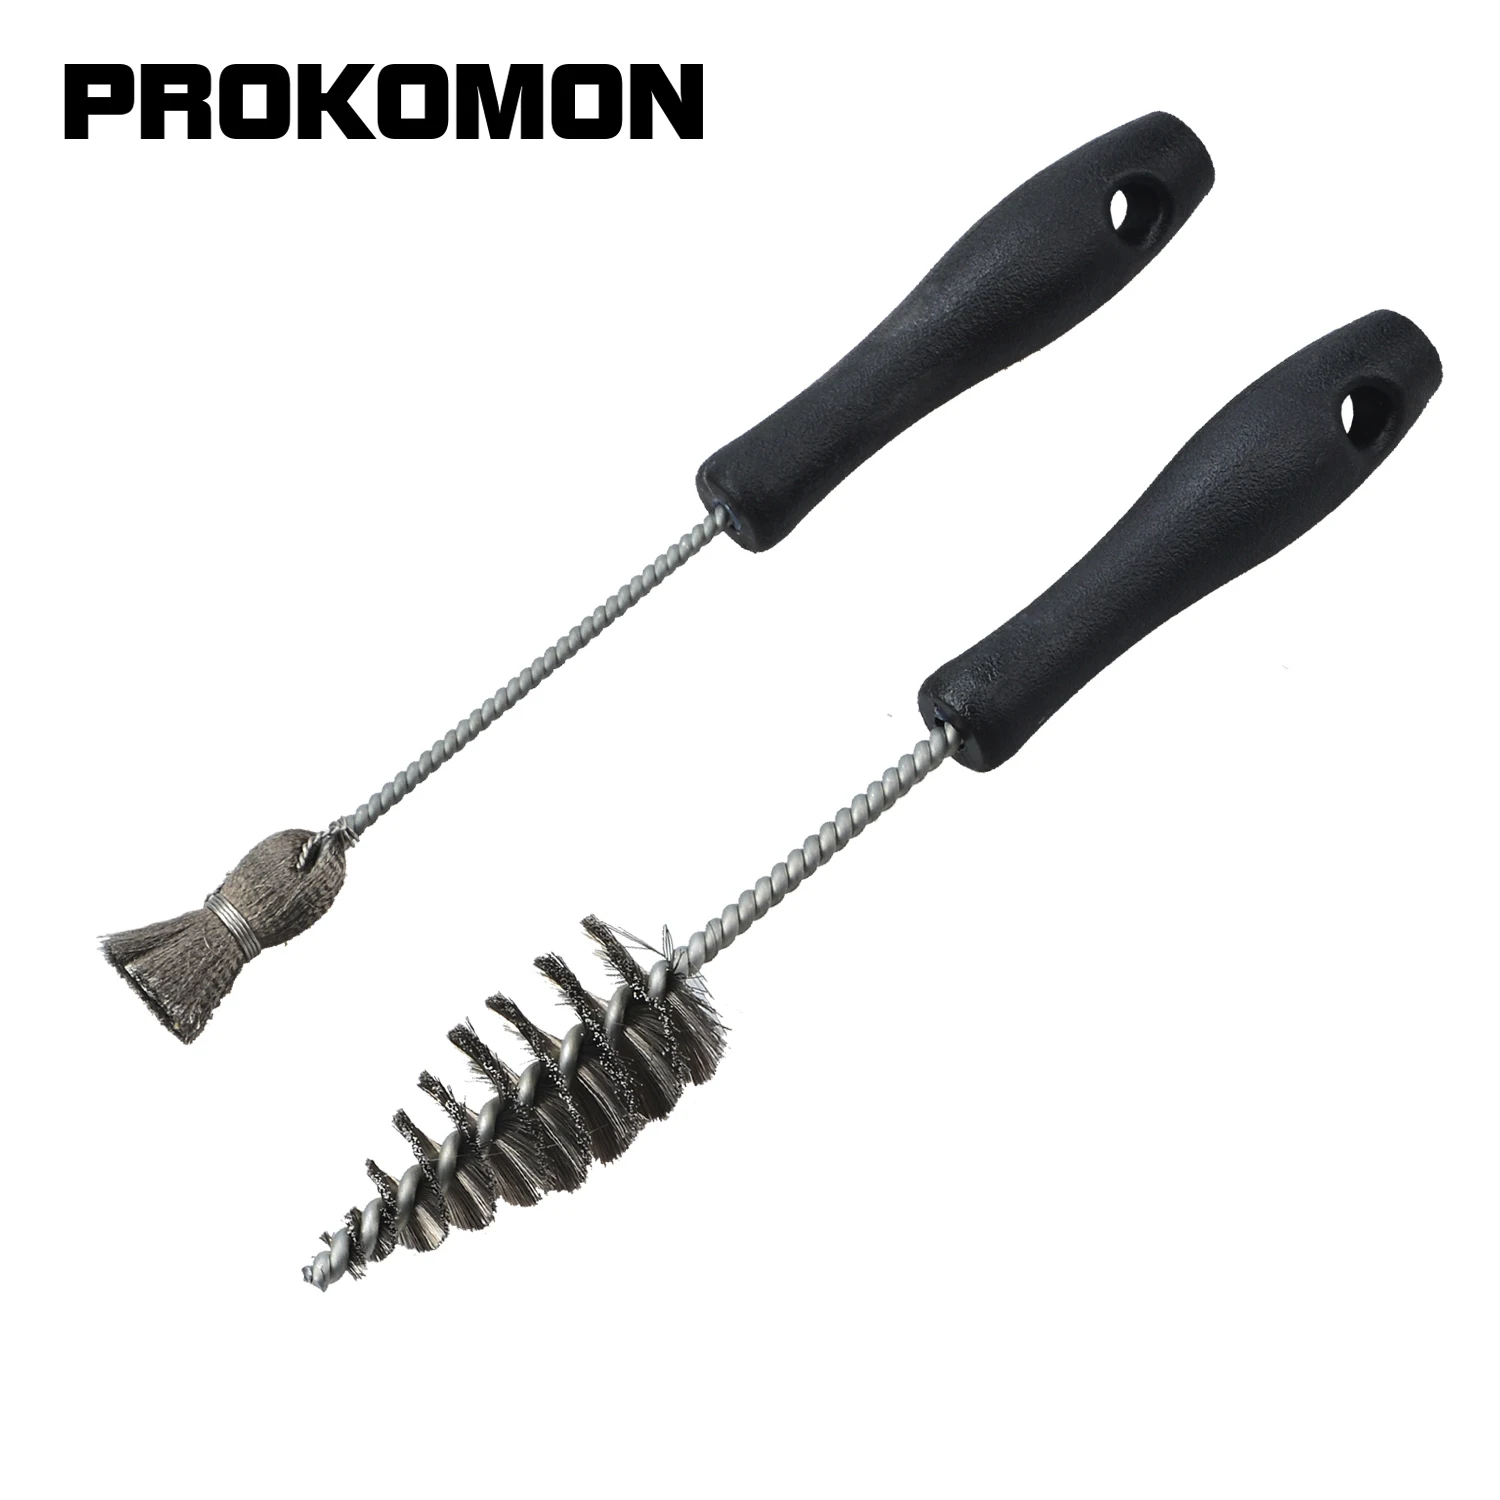 

2pcs Injector Sleeve Cup Bore Seat Cleaning Brush Kit For Ford Powerstroke 7.3L 6.0L 6.4L 6.7L 1994-2018